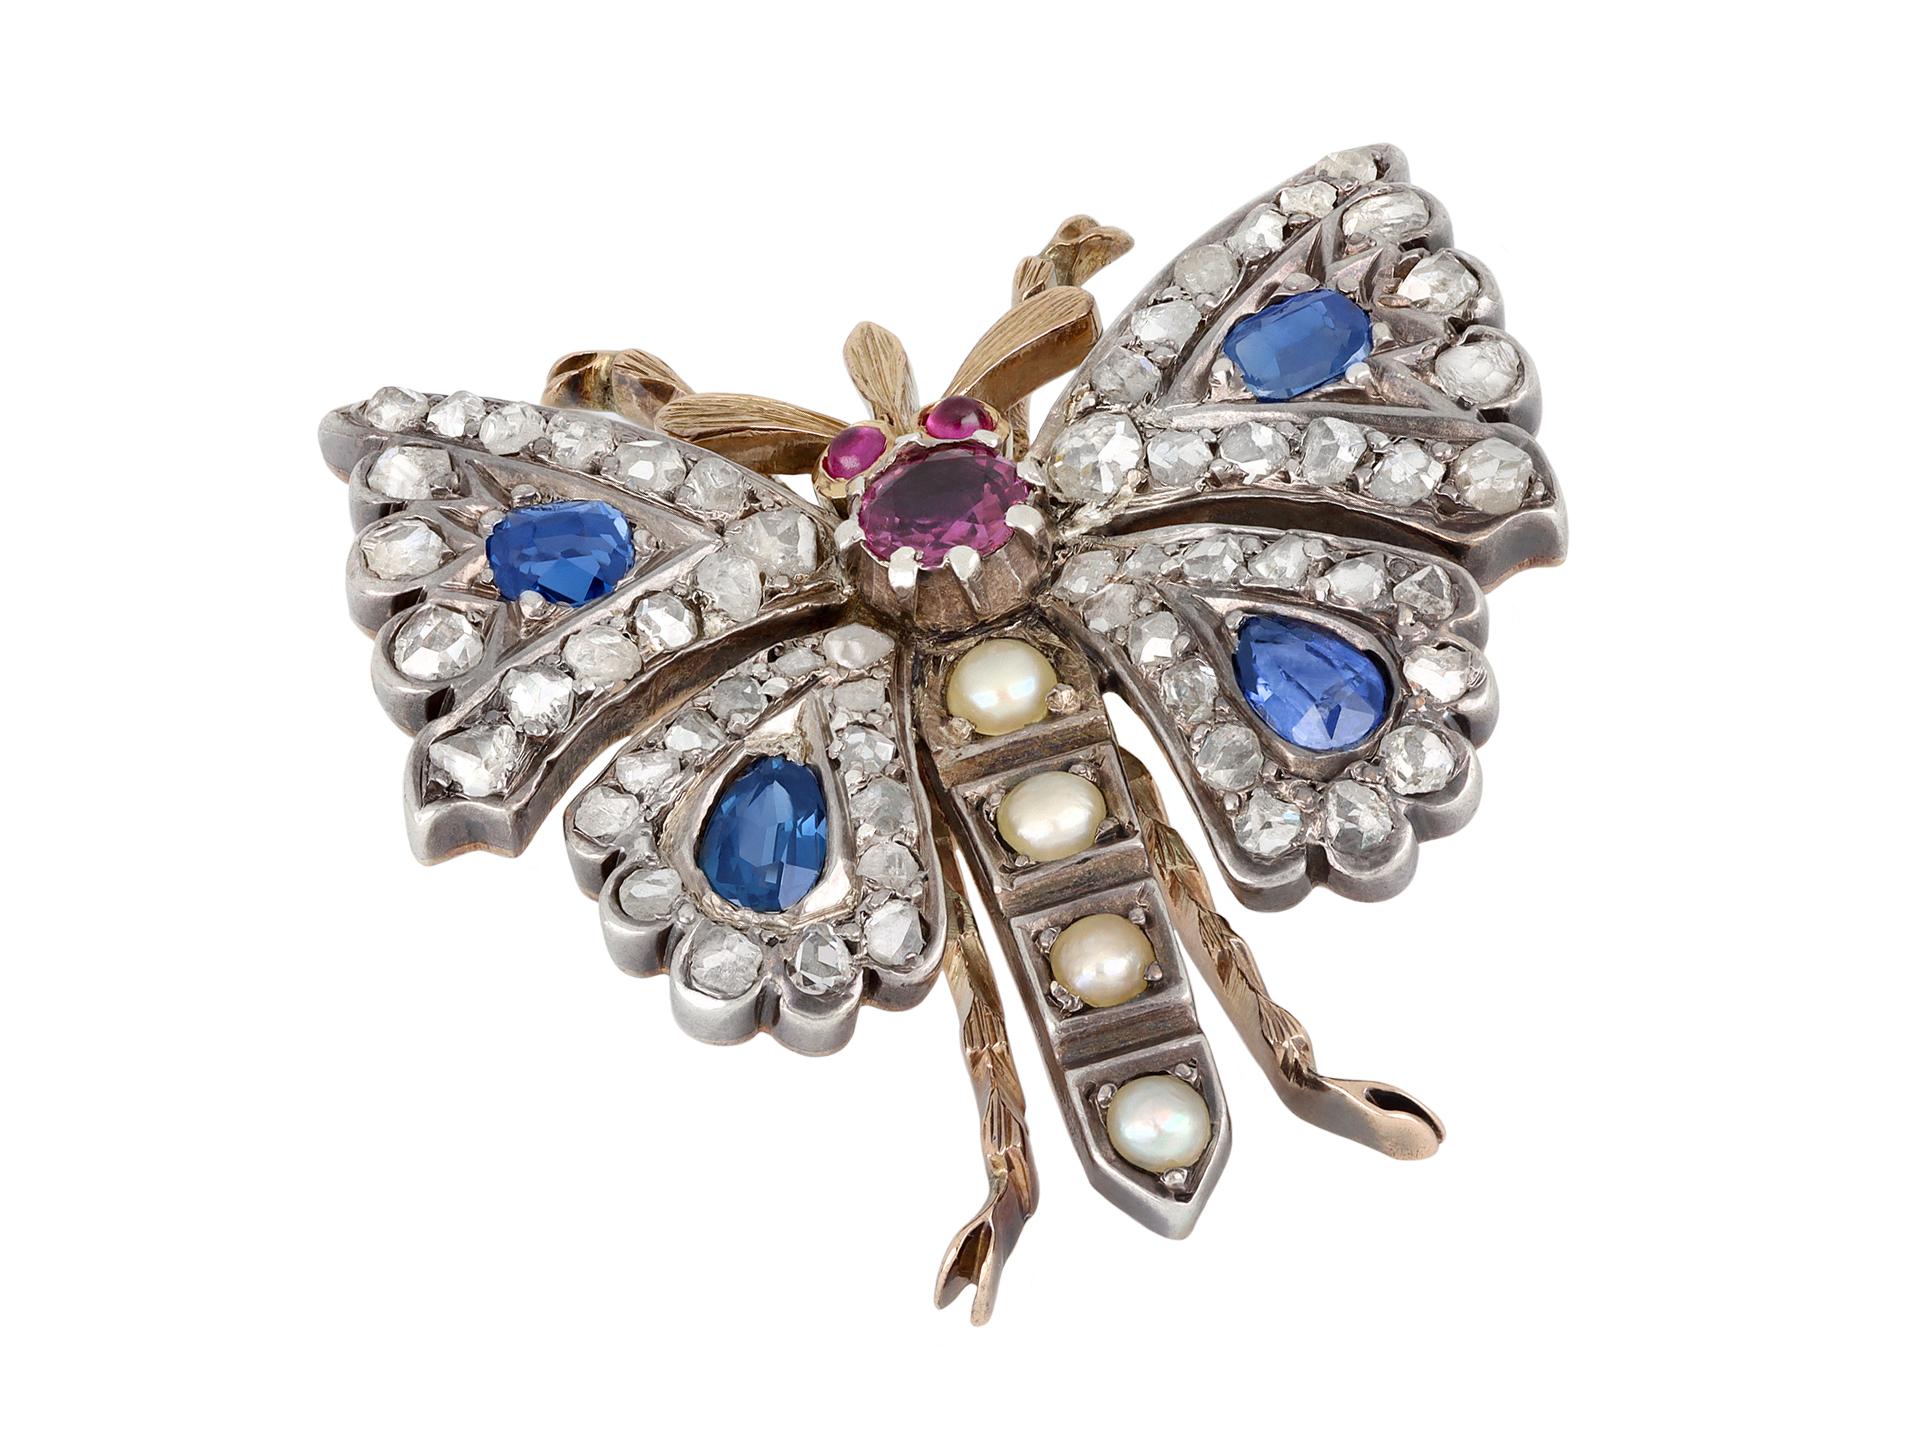 Victorian gem set butterfly brooch/pendant. Centrally set with a round old cut natural unenhanced ruby in a closed back cut-down setting with an approximate weight of 0.30 carats, additionally set with two round cabochon cut natural unenhanced